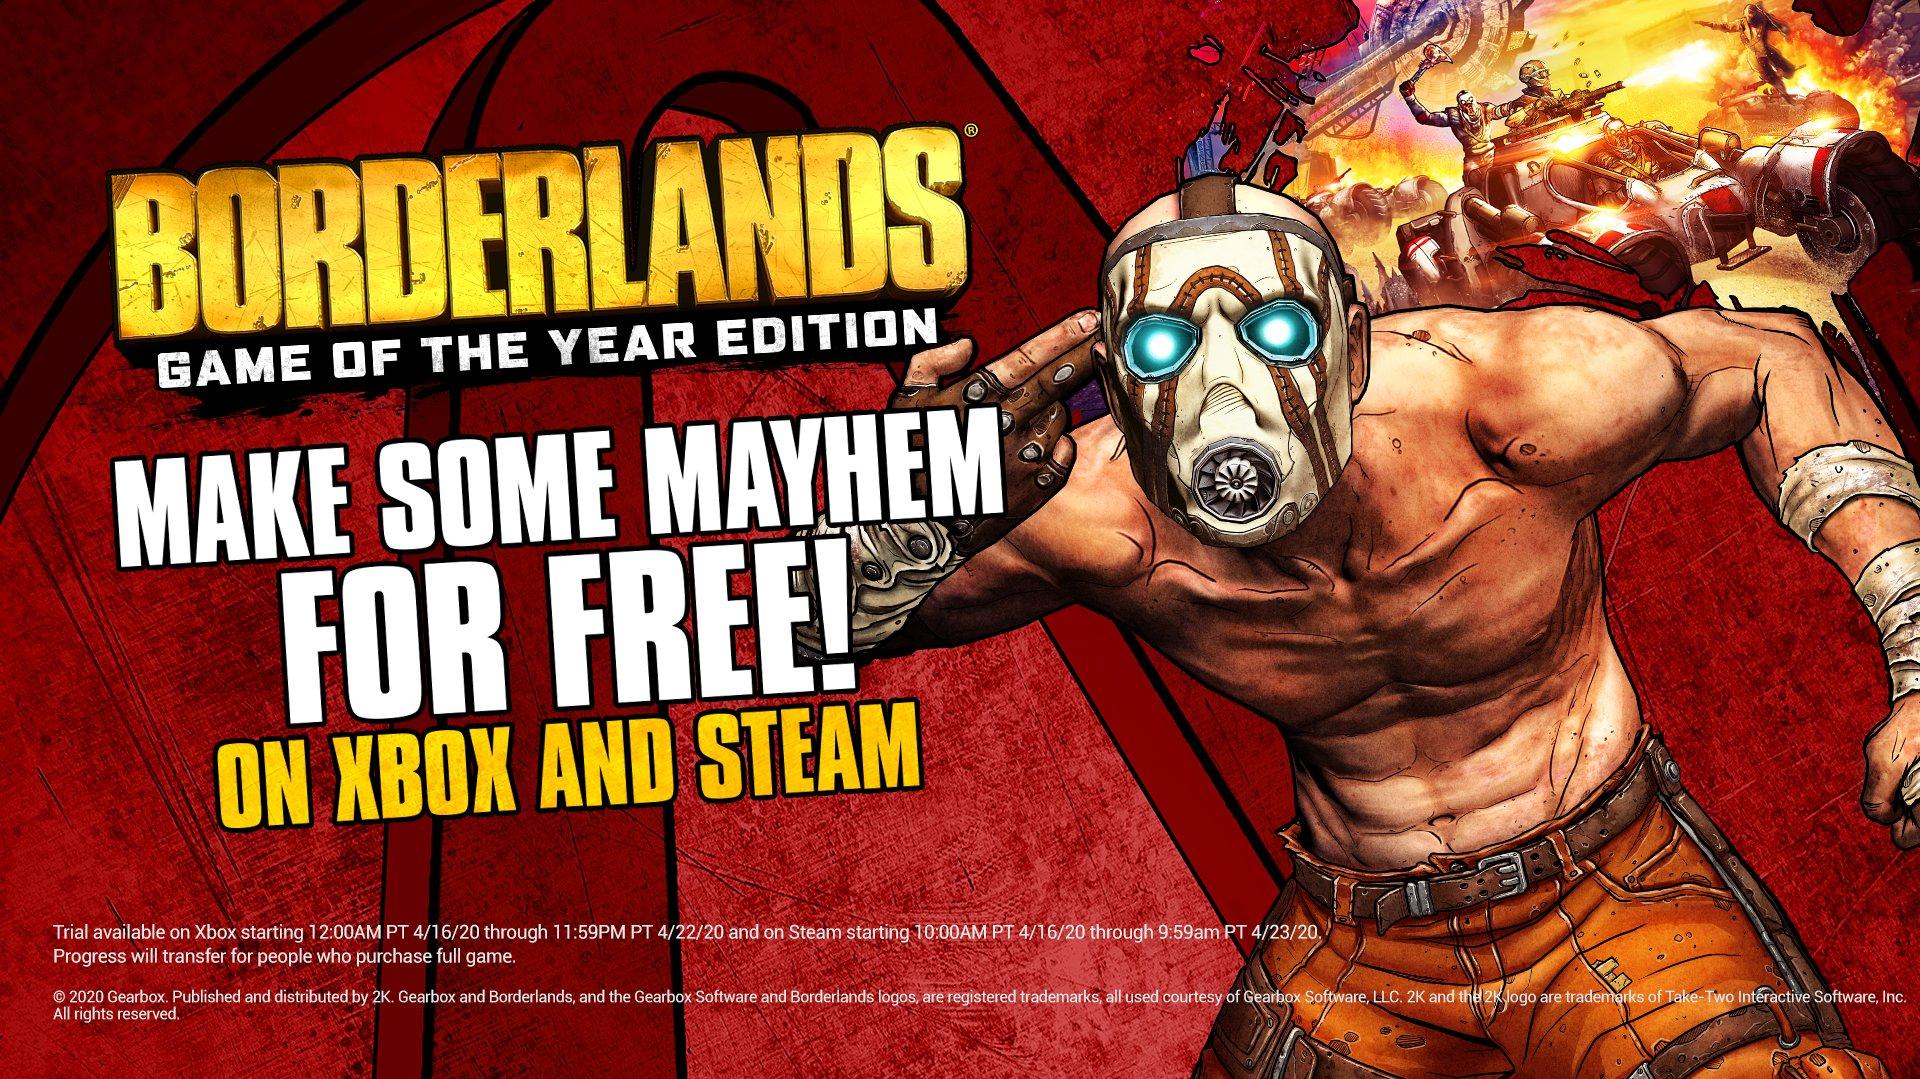 Borderlands on Borderlands Game of the Year Edition is